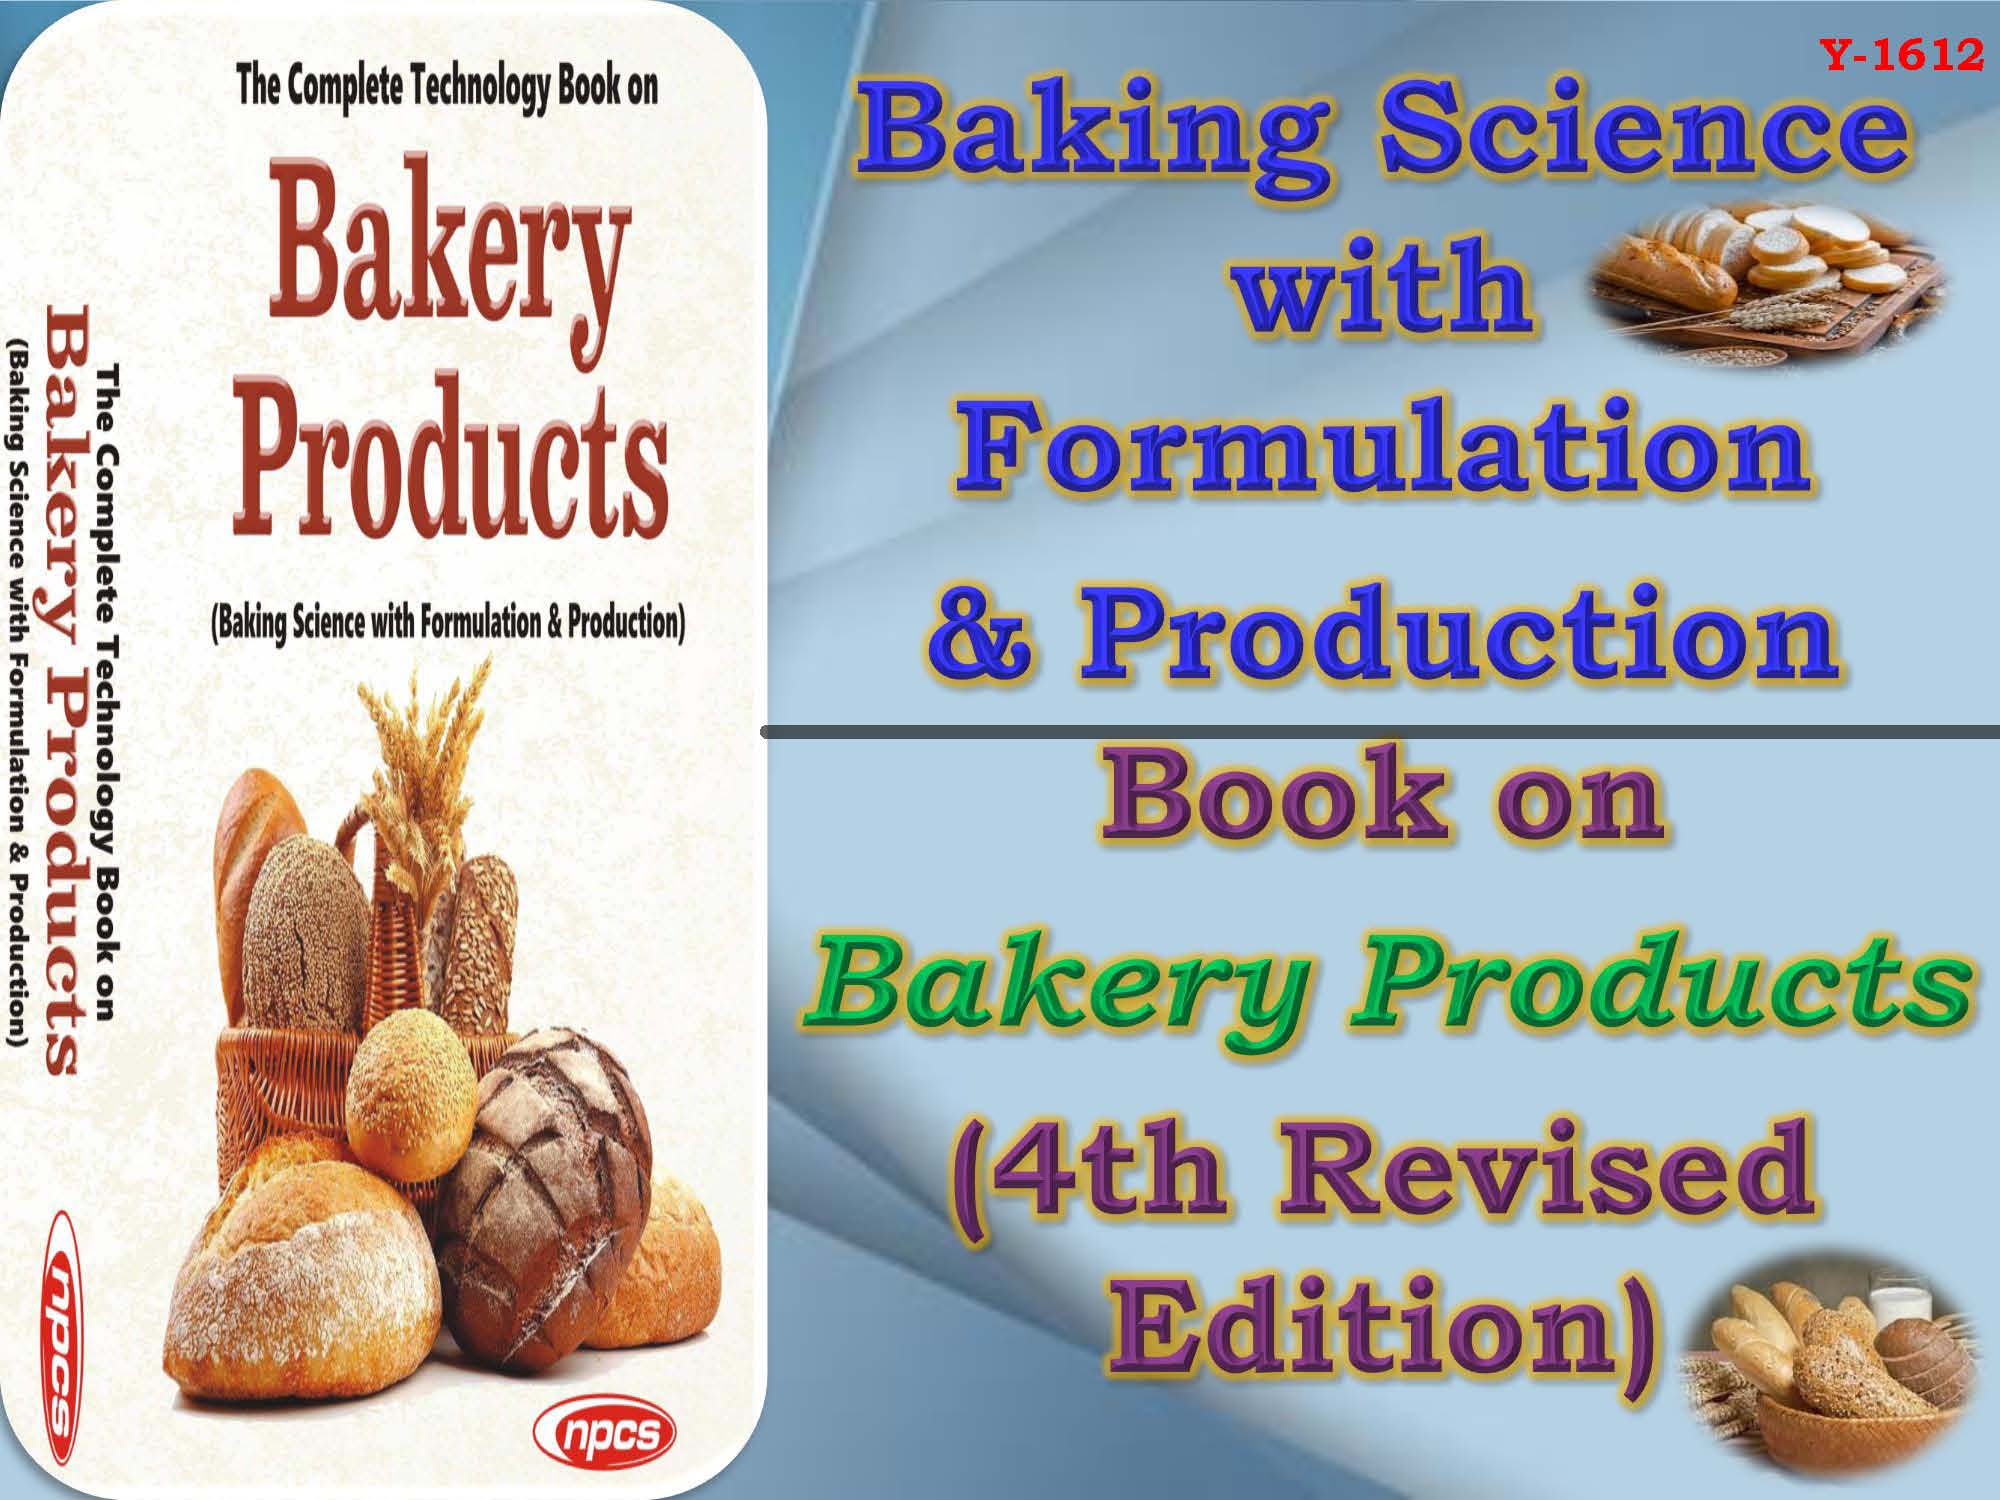 The Complete Technology Book on Bakery Products